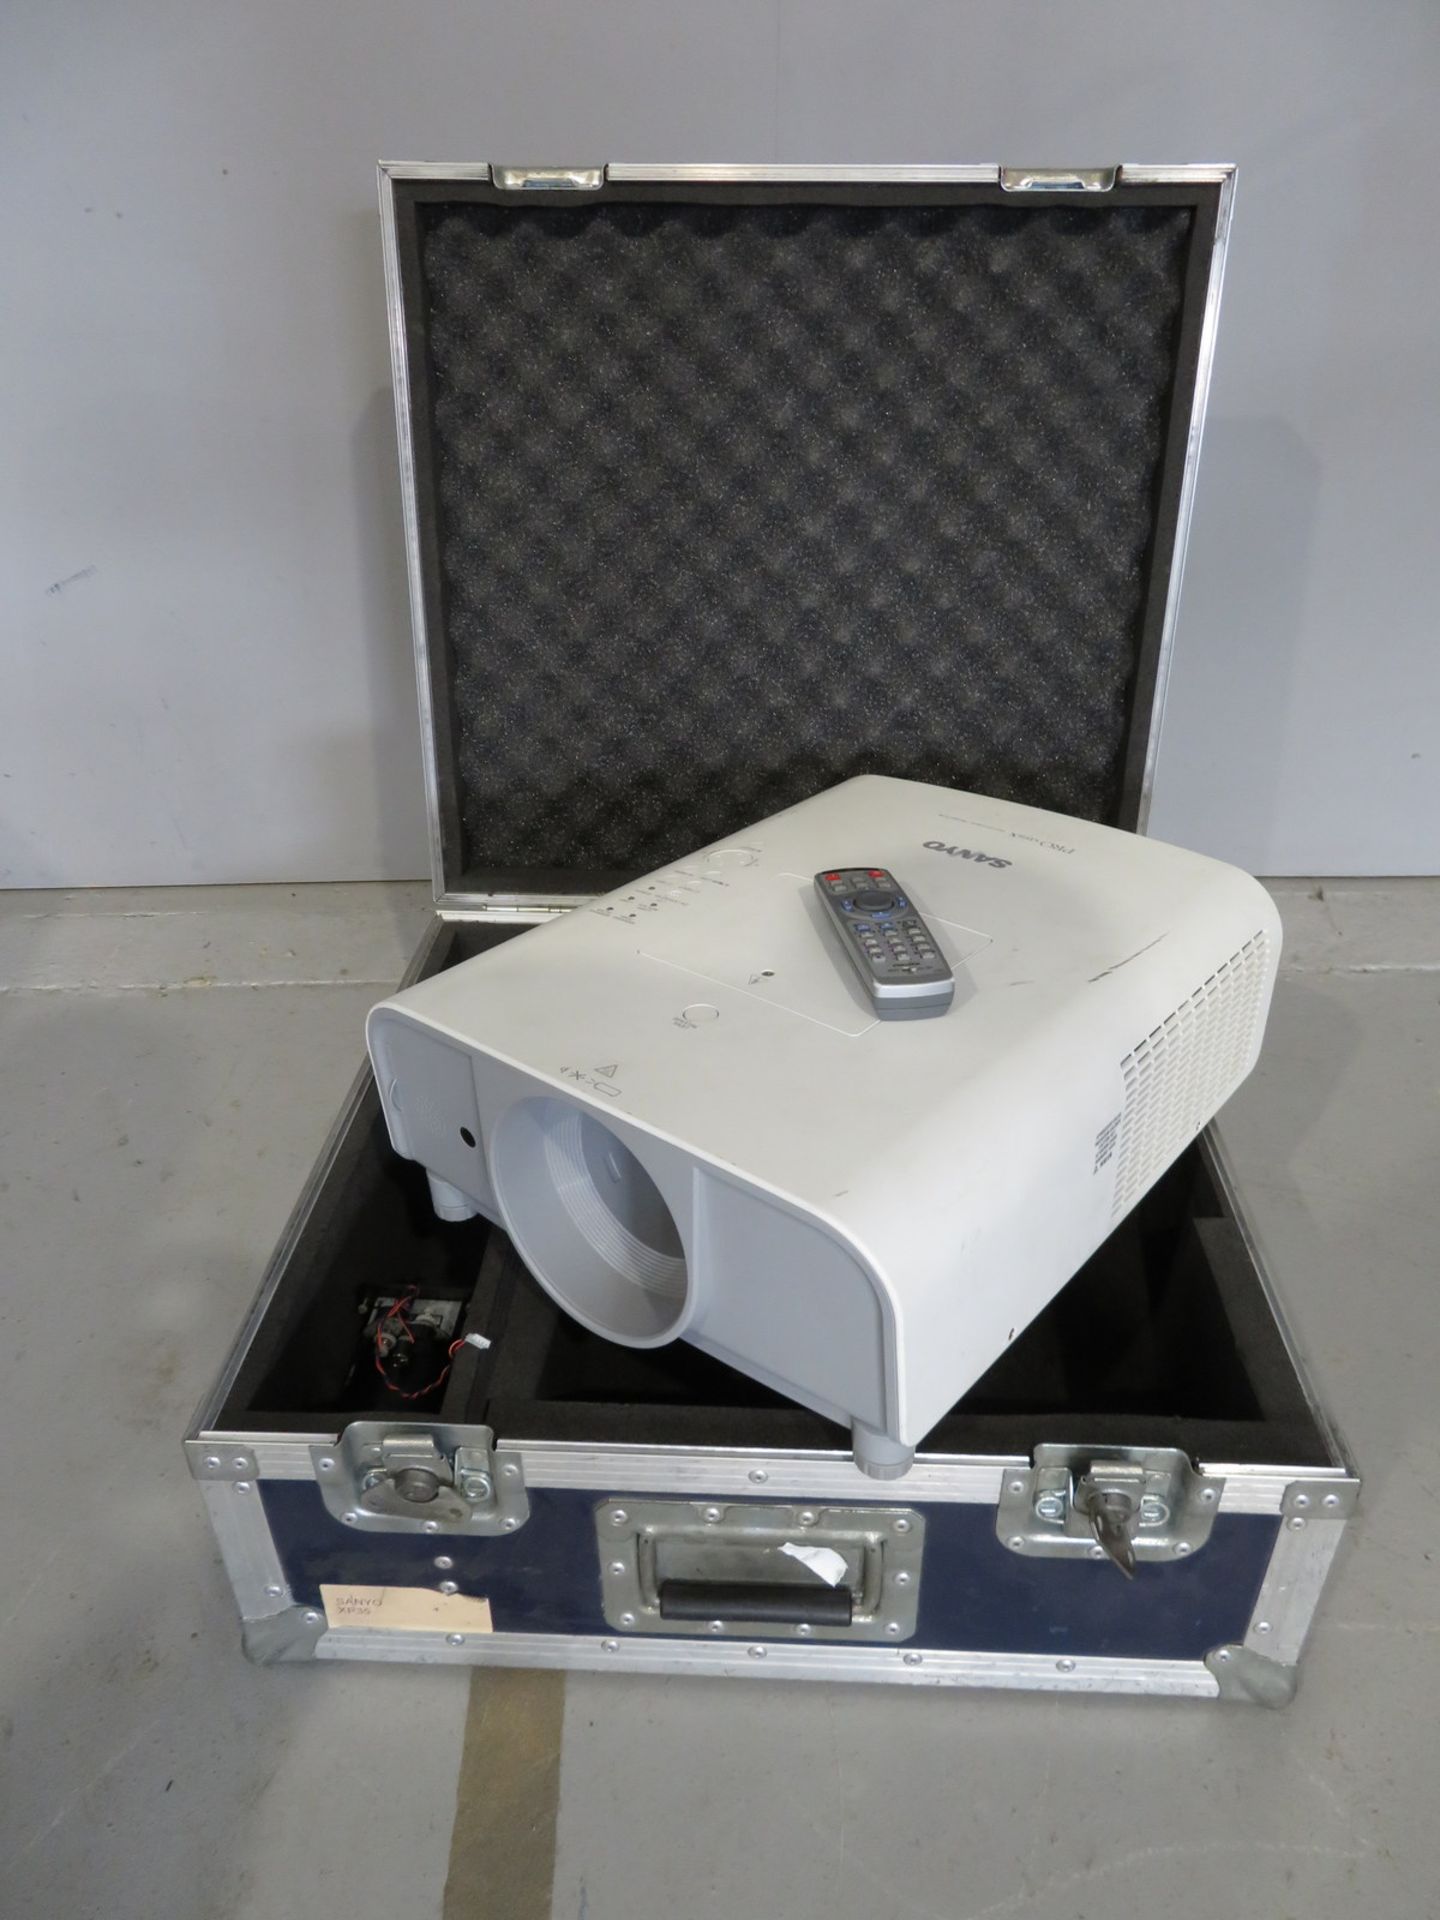 Sanyo XT25 Projector including lens in flightcase. Includes remote. Working condition.